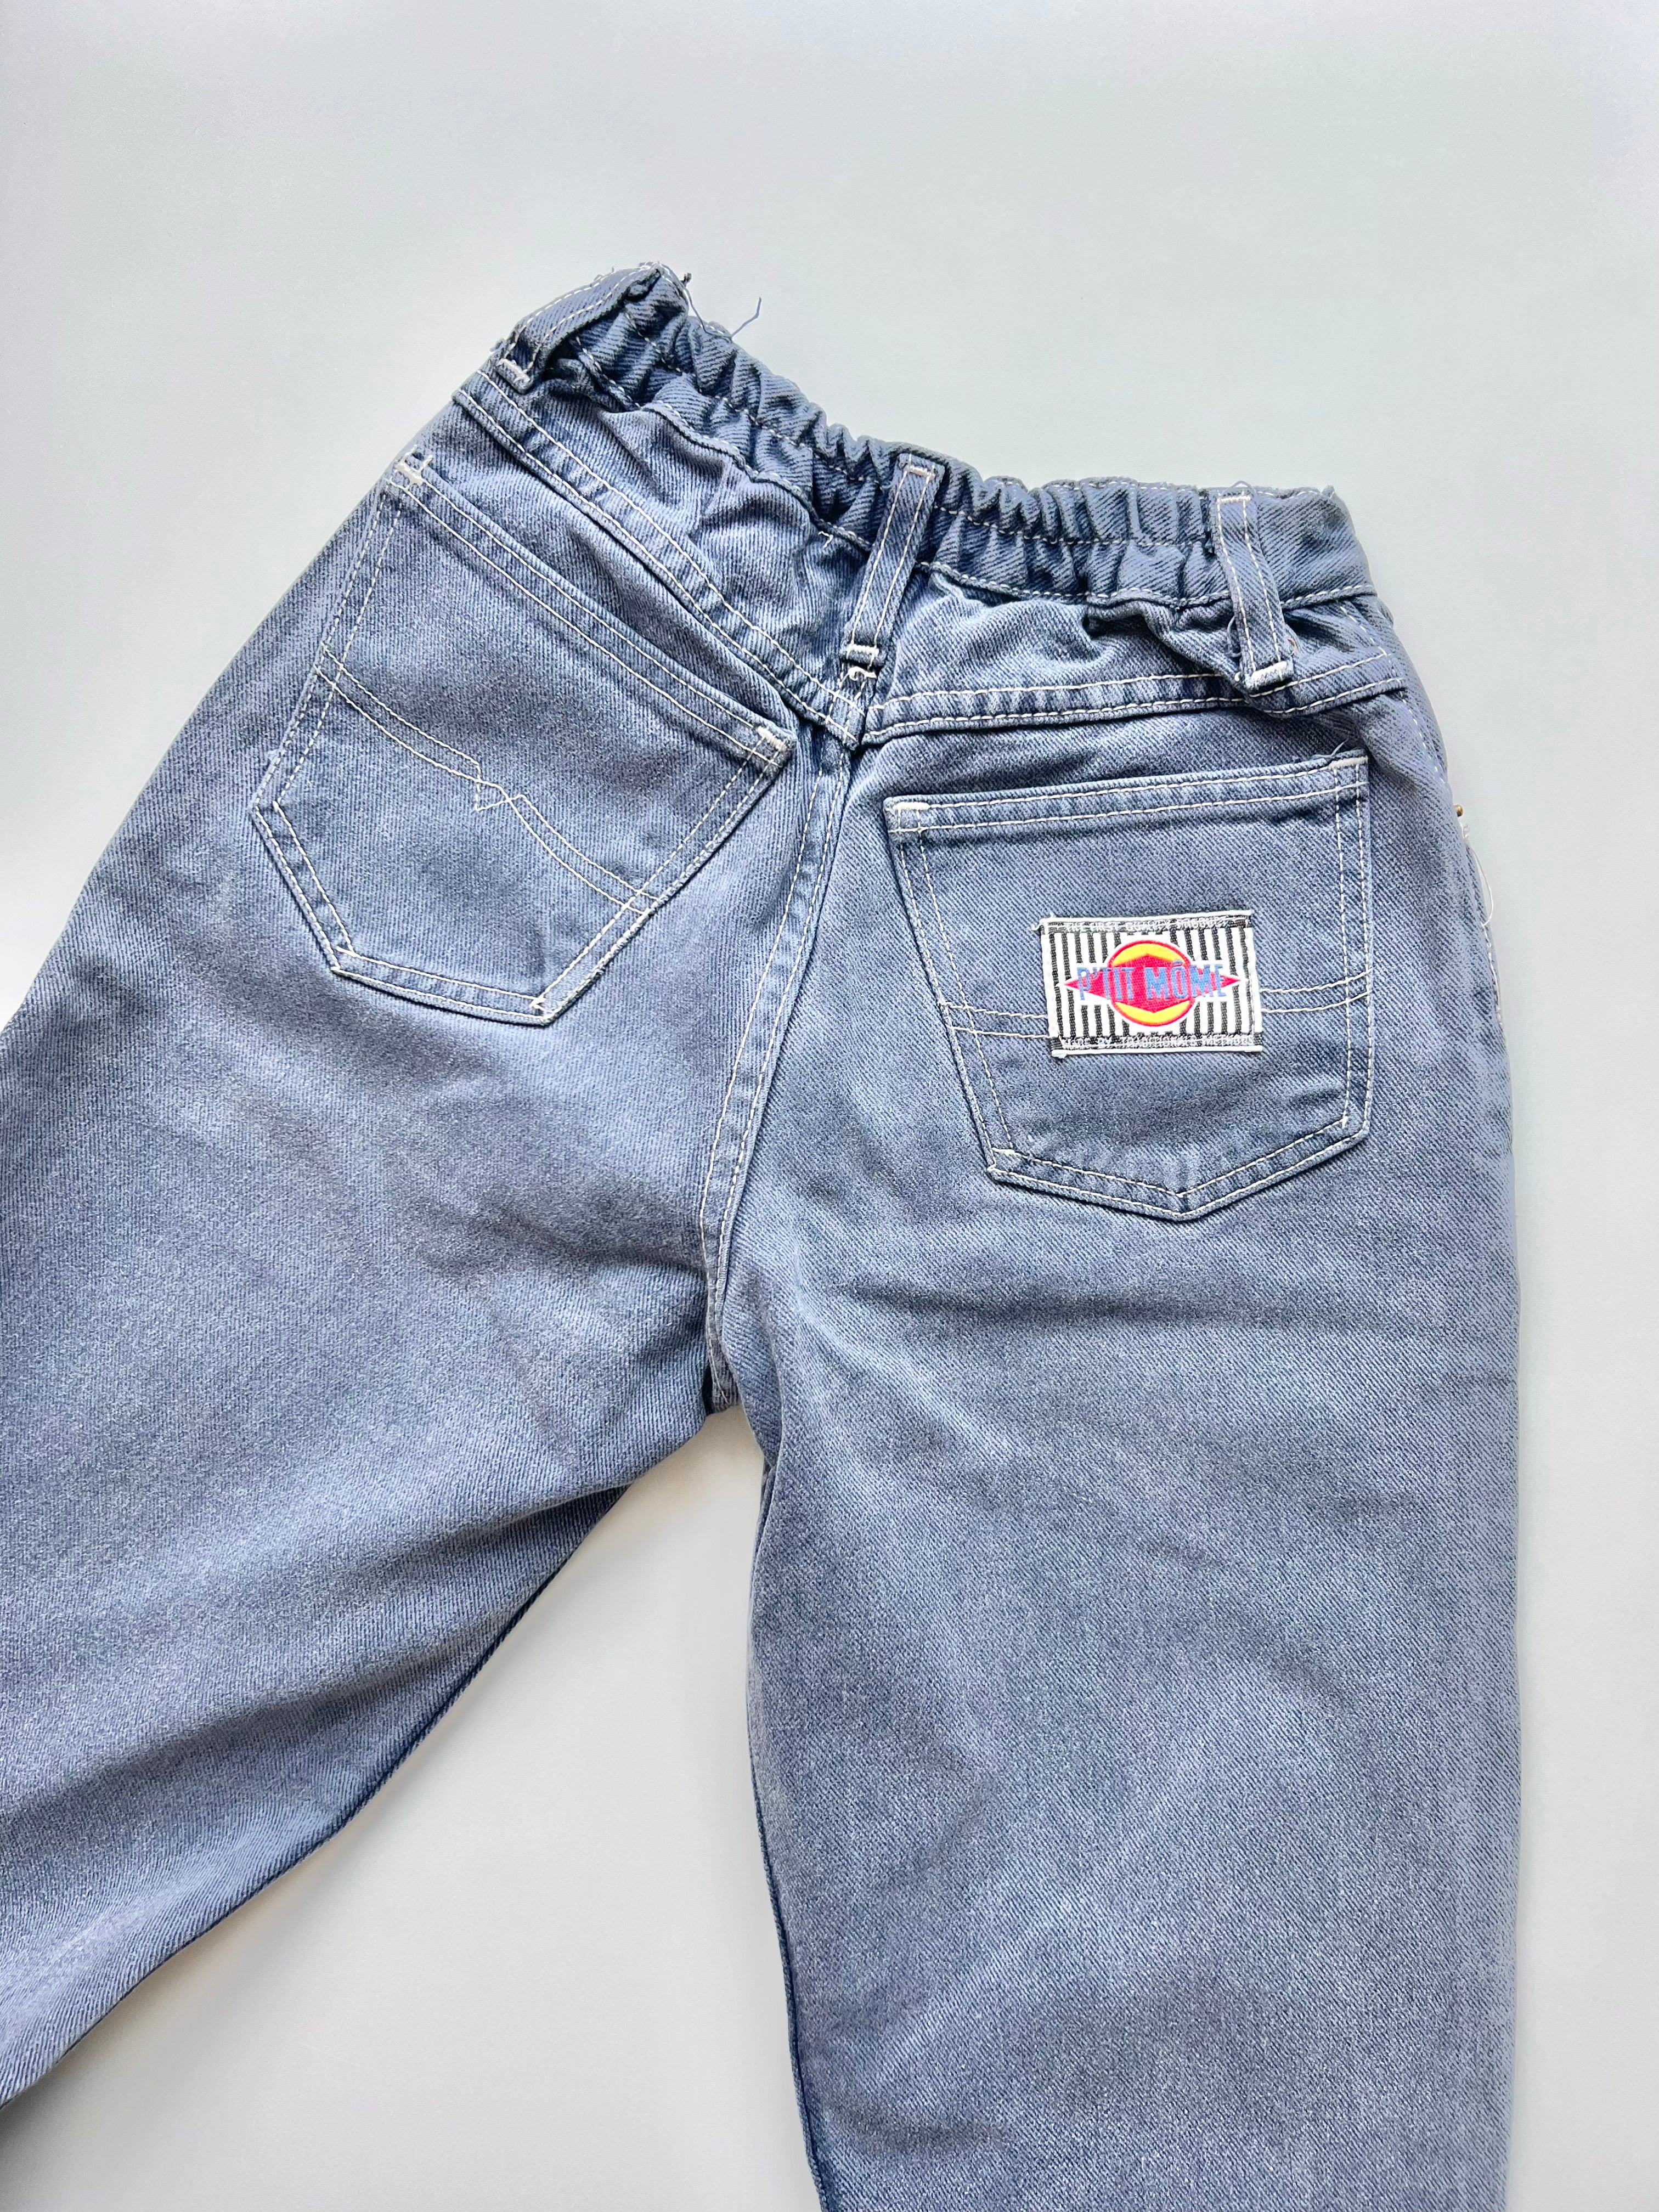 French Vintage Jeans Age 7-8